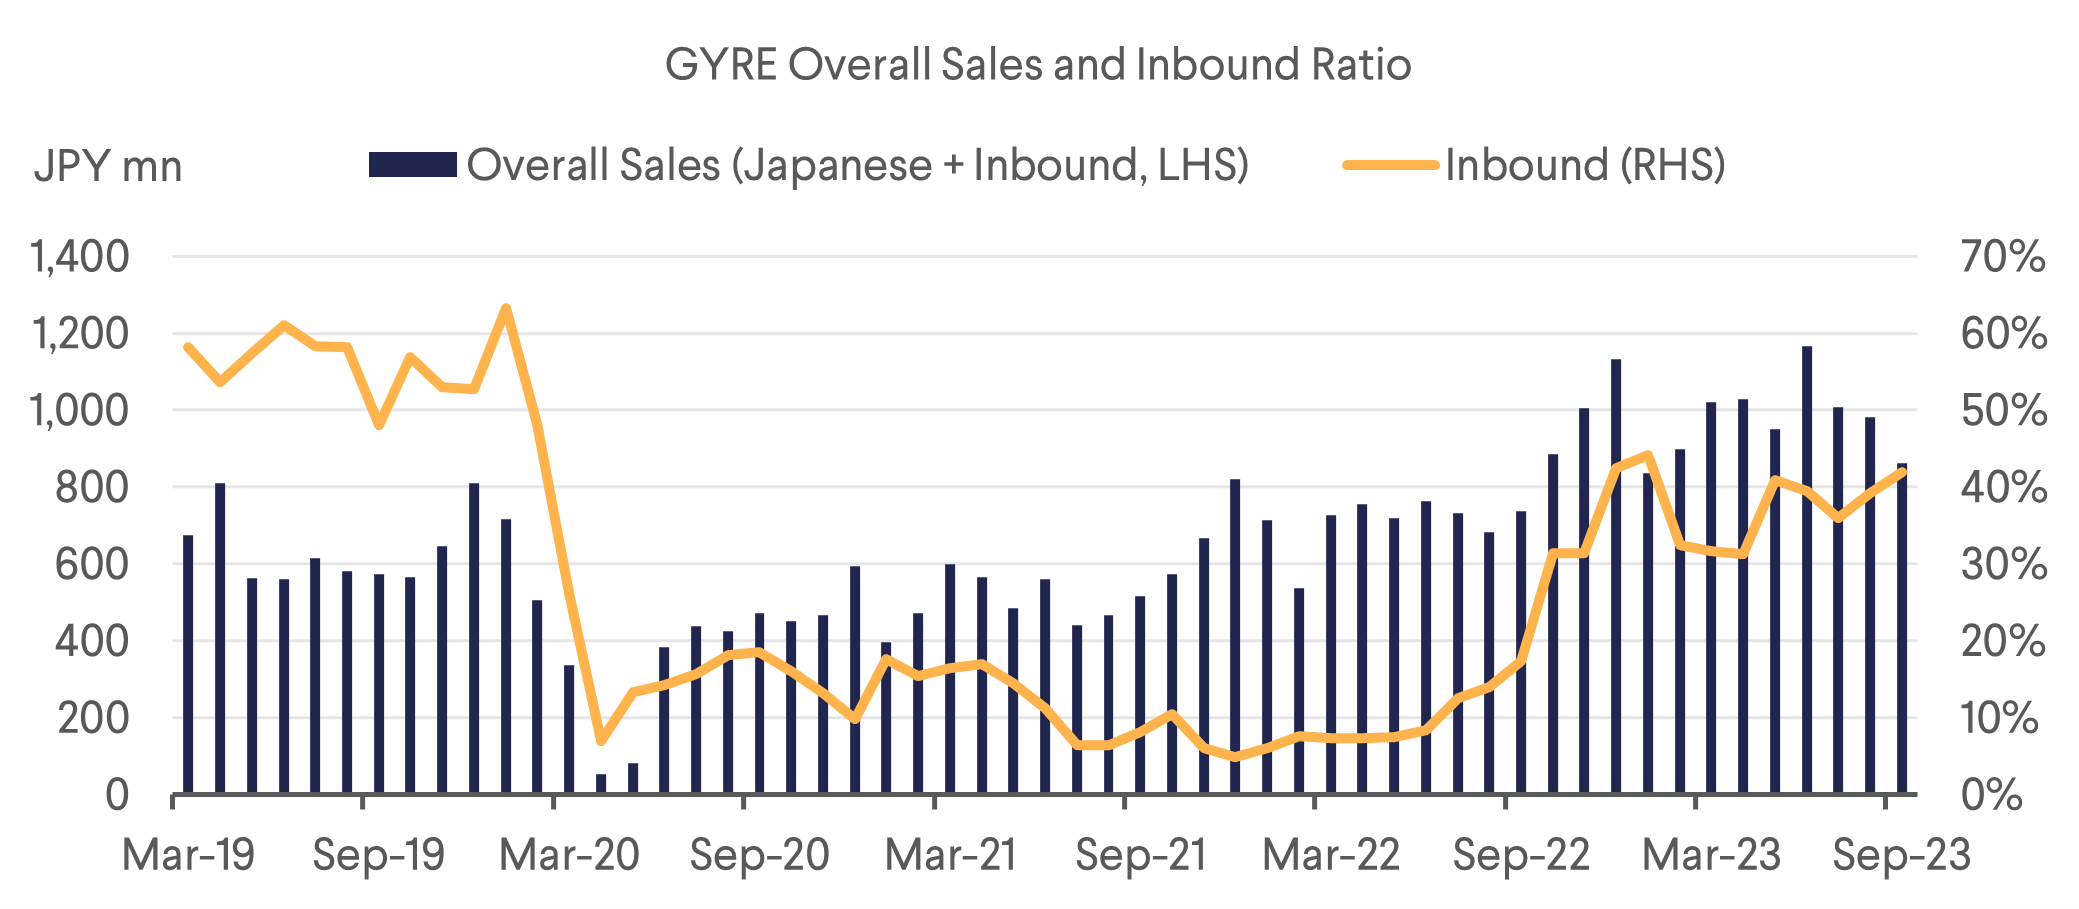 GYRE Overall Sales and Inbound Ratio